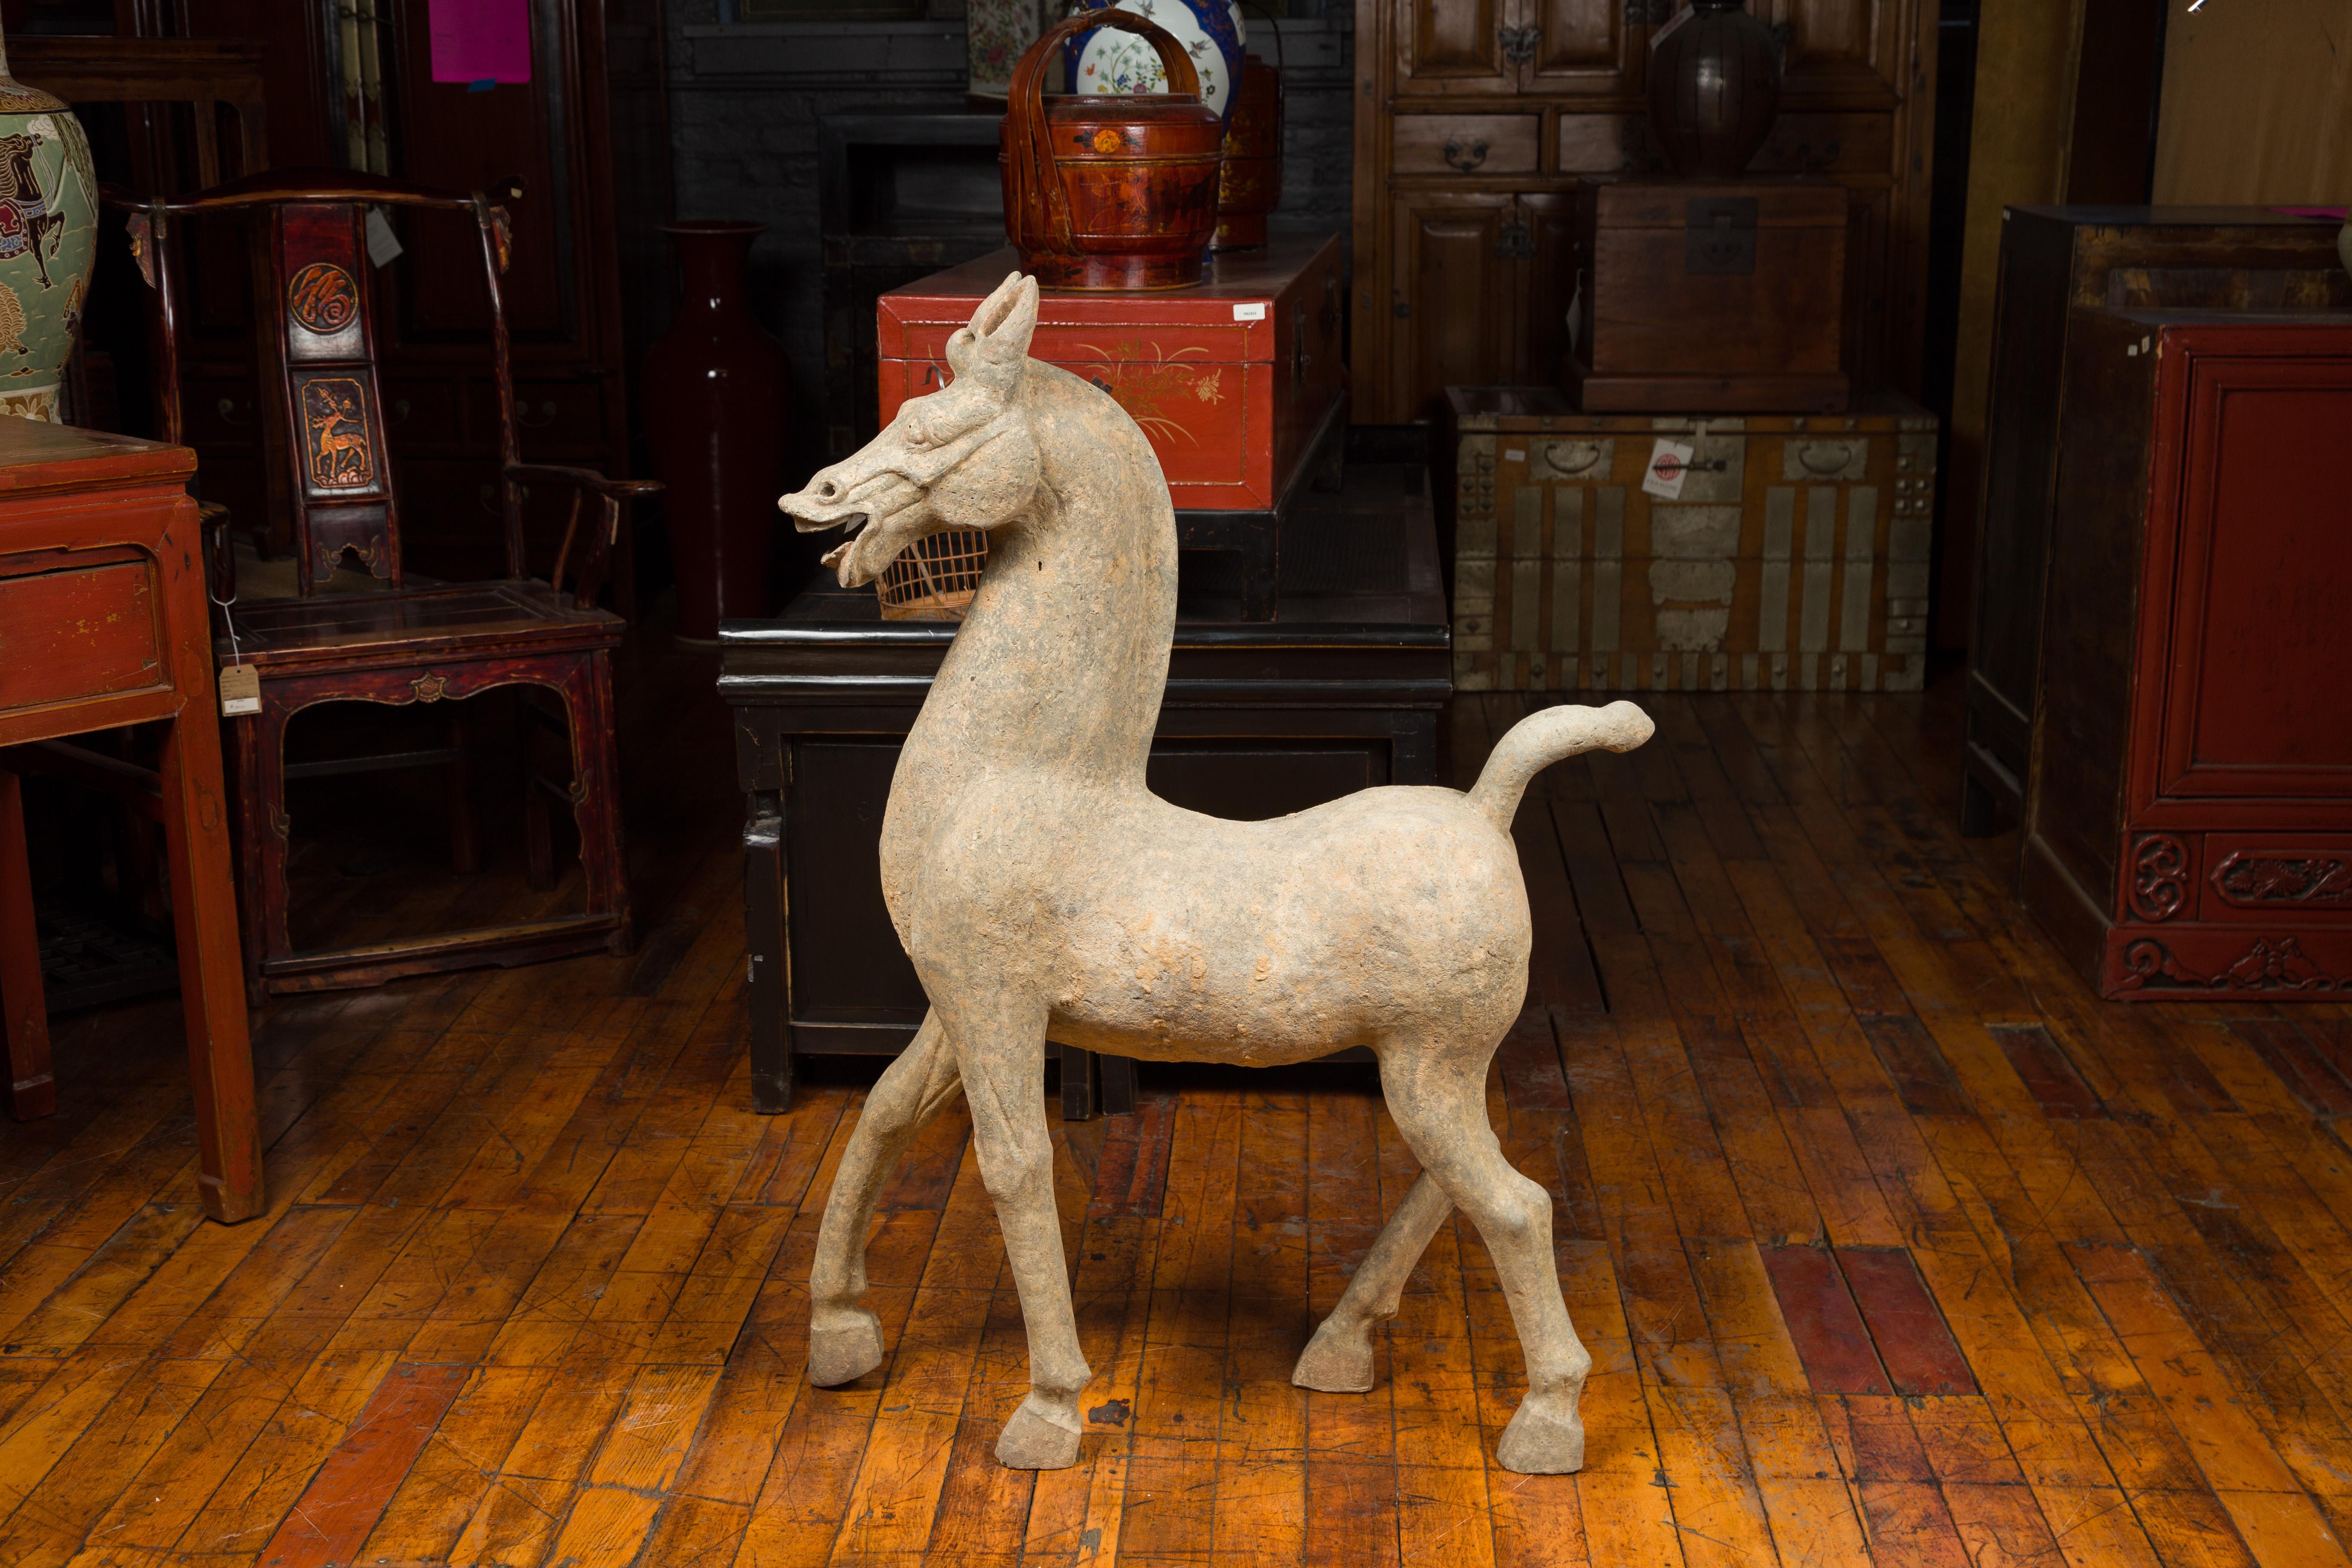 A large Chinese Han dynasty period terracotta walking horse with mineral deposits, circa 202 BC-200 AD. Handcrafted in China during the prestigious Han dynasty, this large and unusual Chinese terracotta horse is depicted walking in a very animated